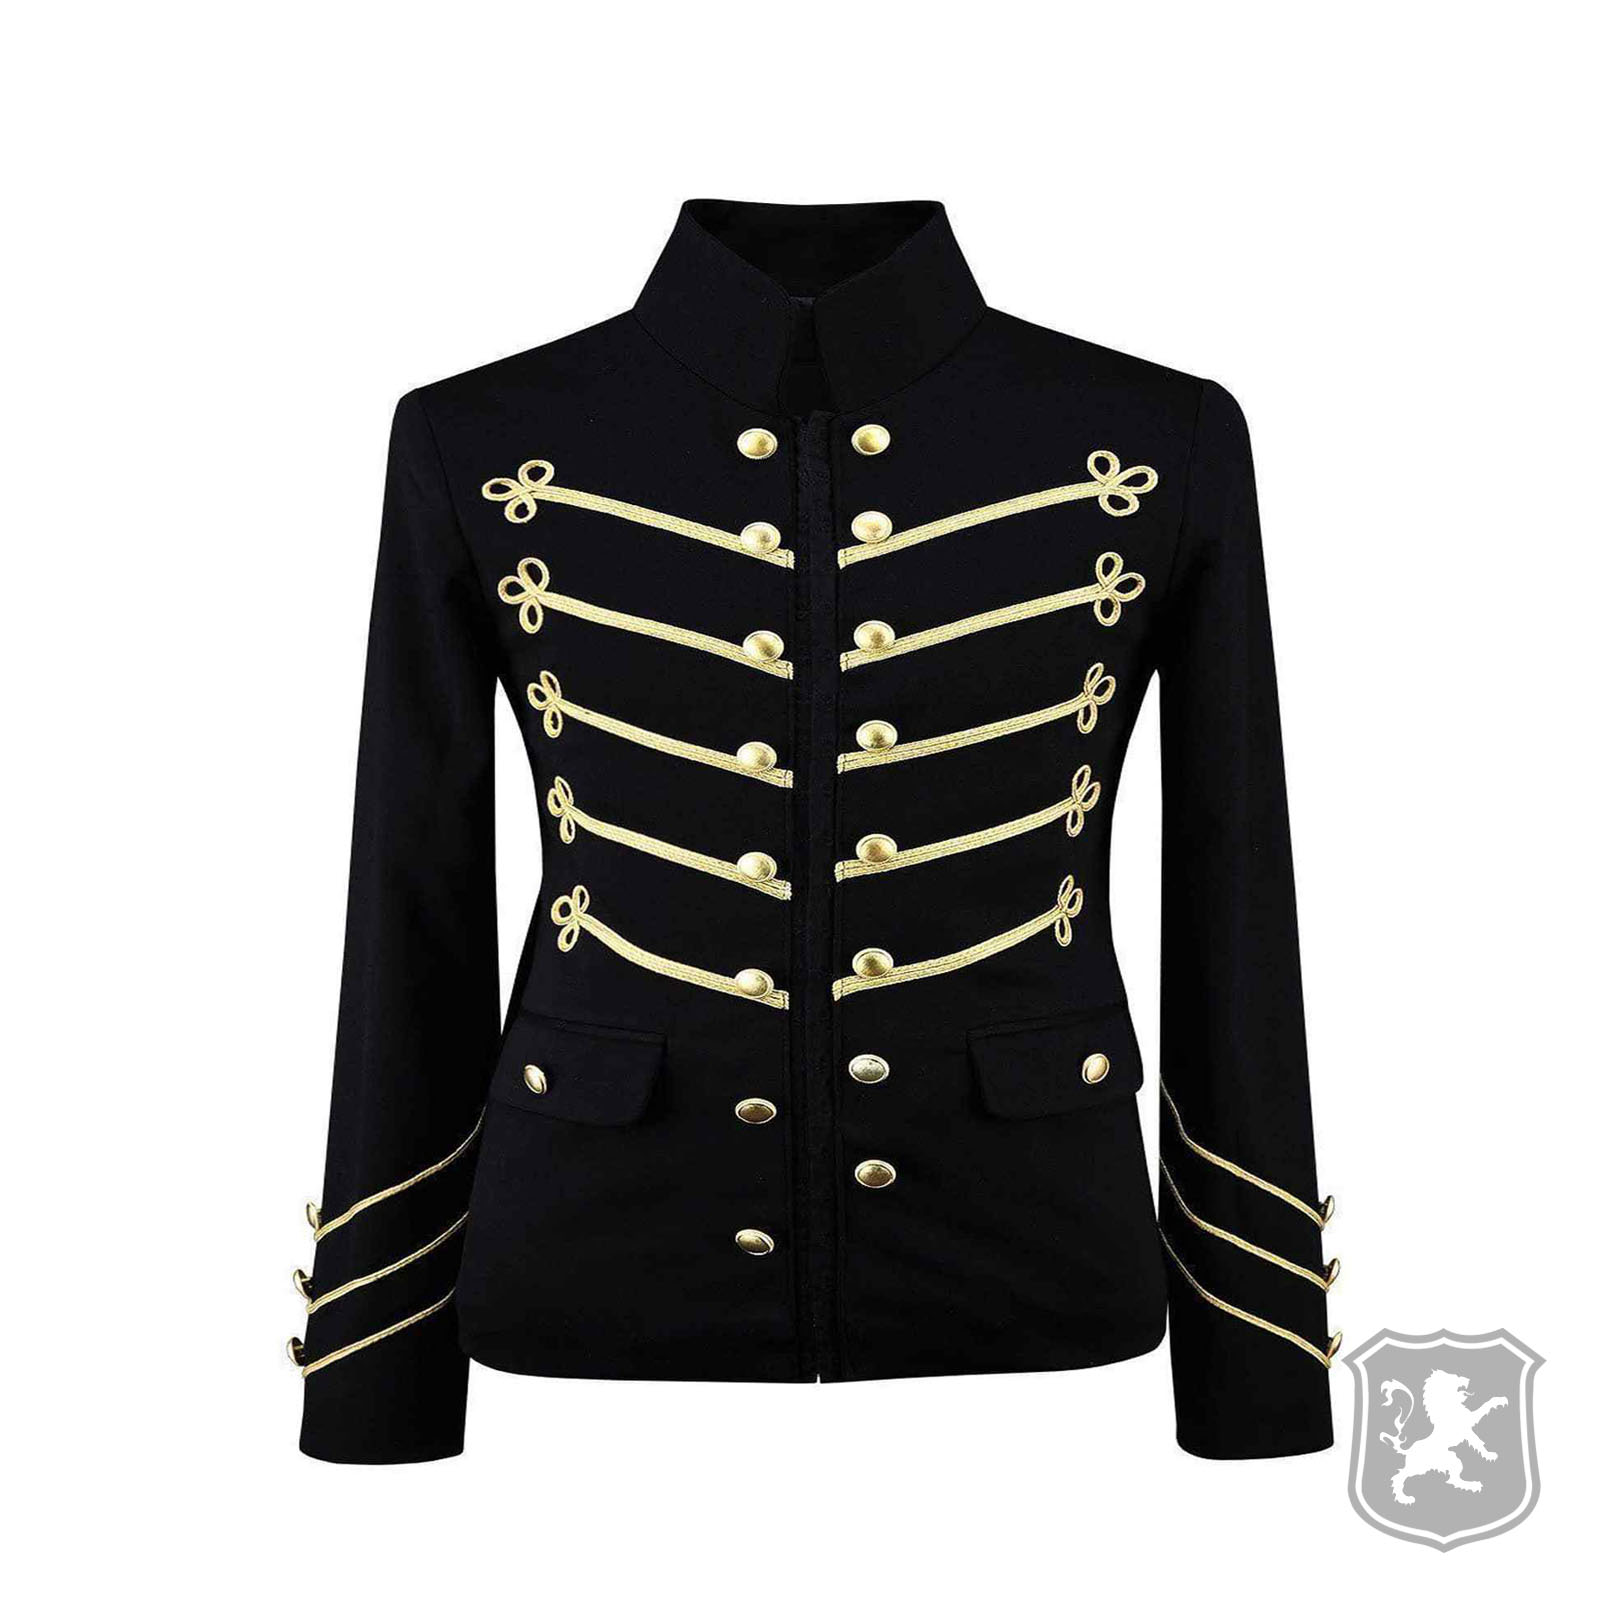 Black Military Jacket With Gold Embroidery - Kilt Zone